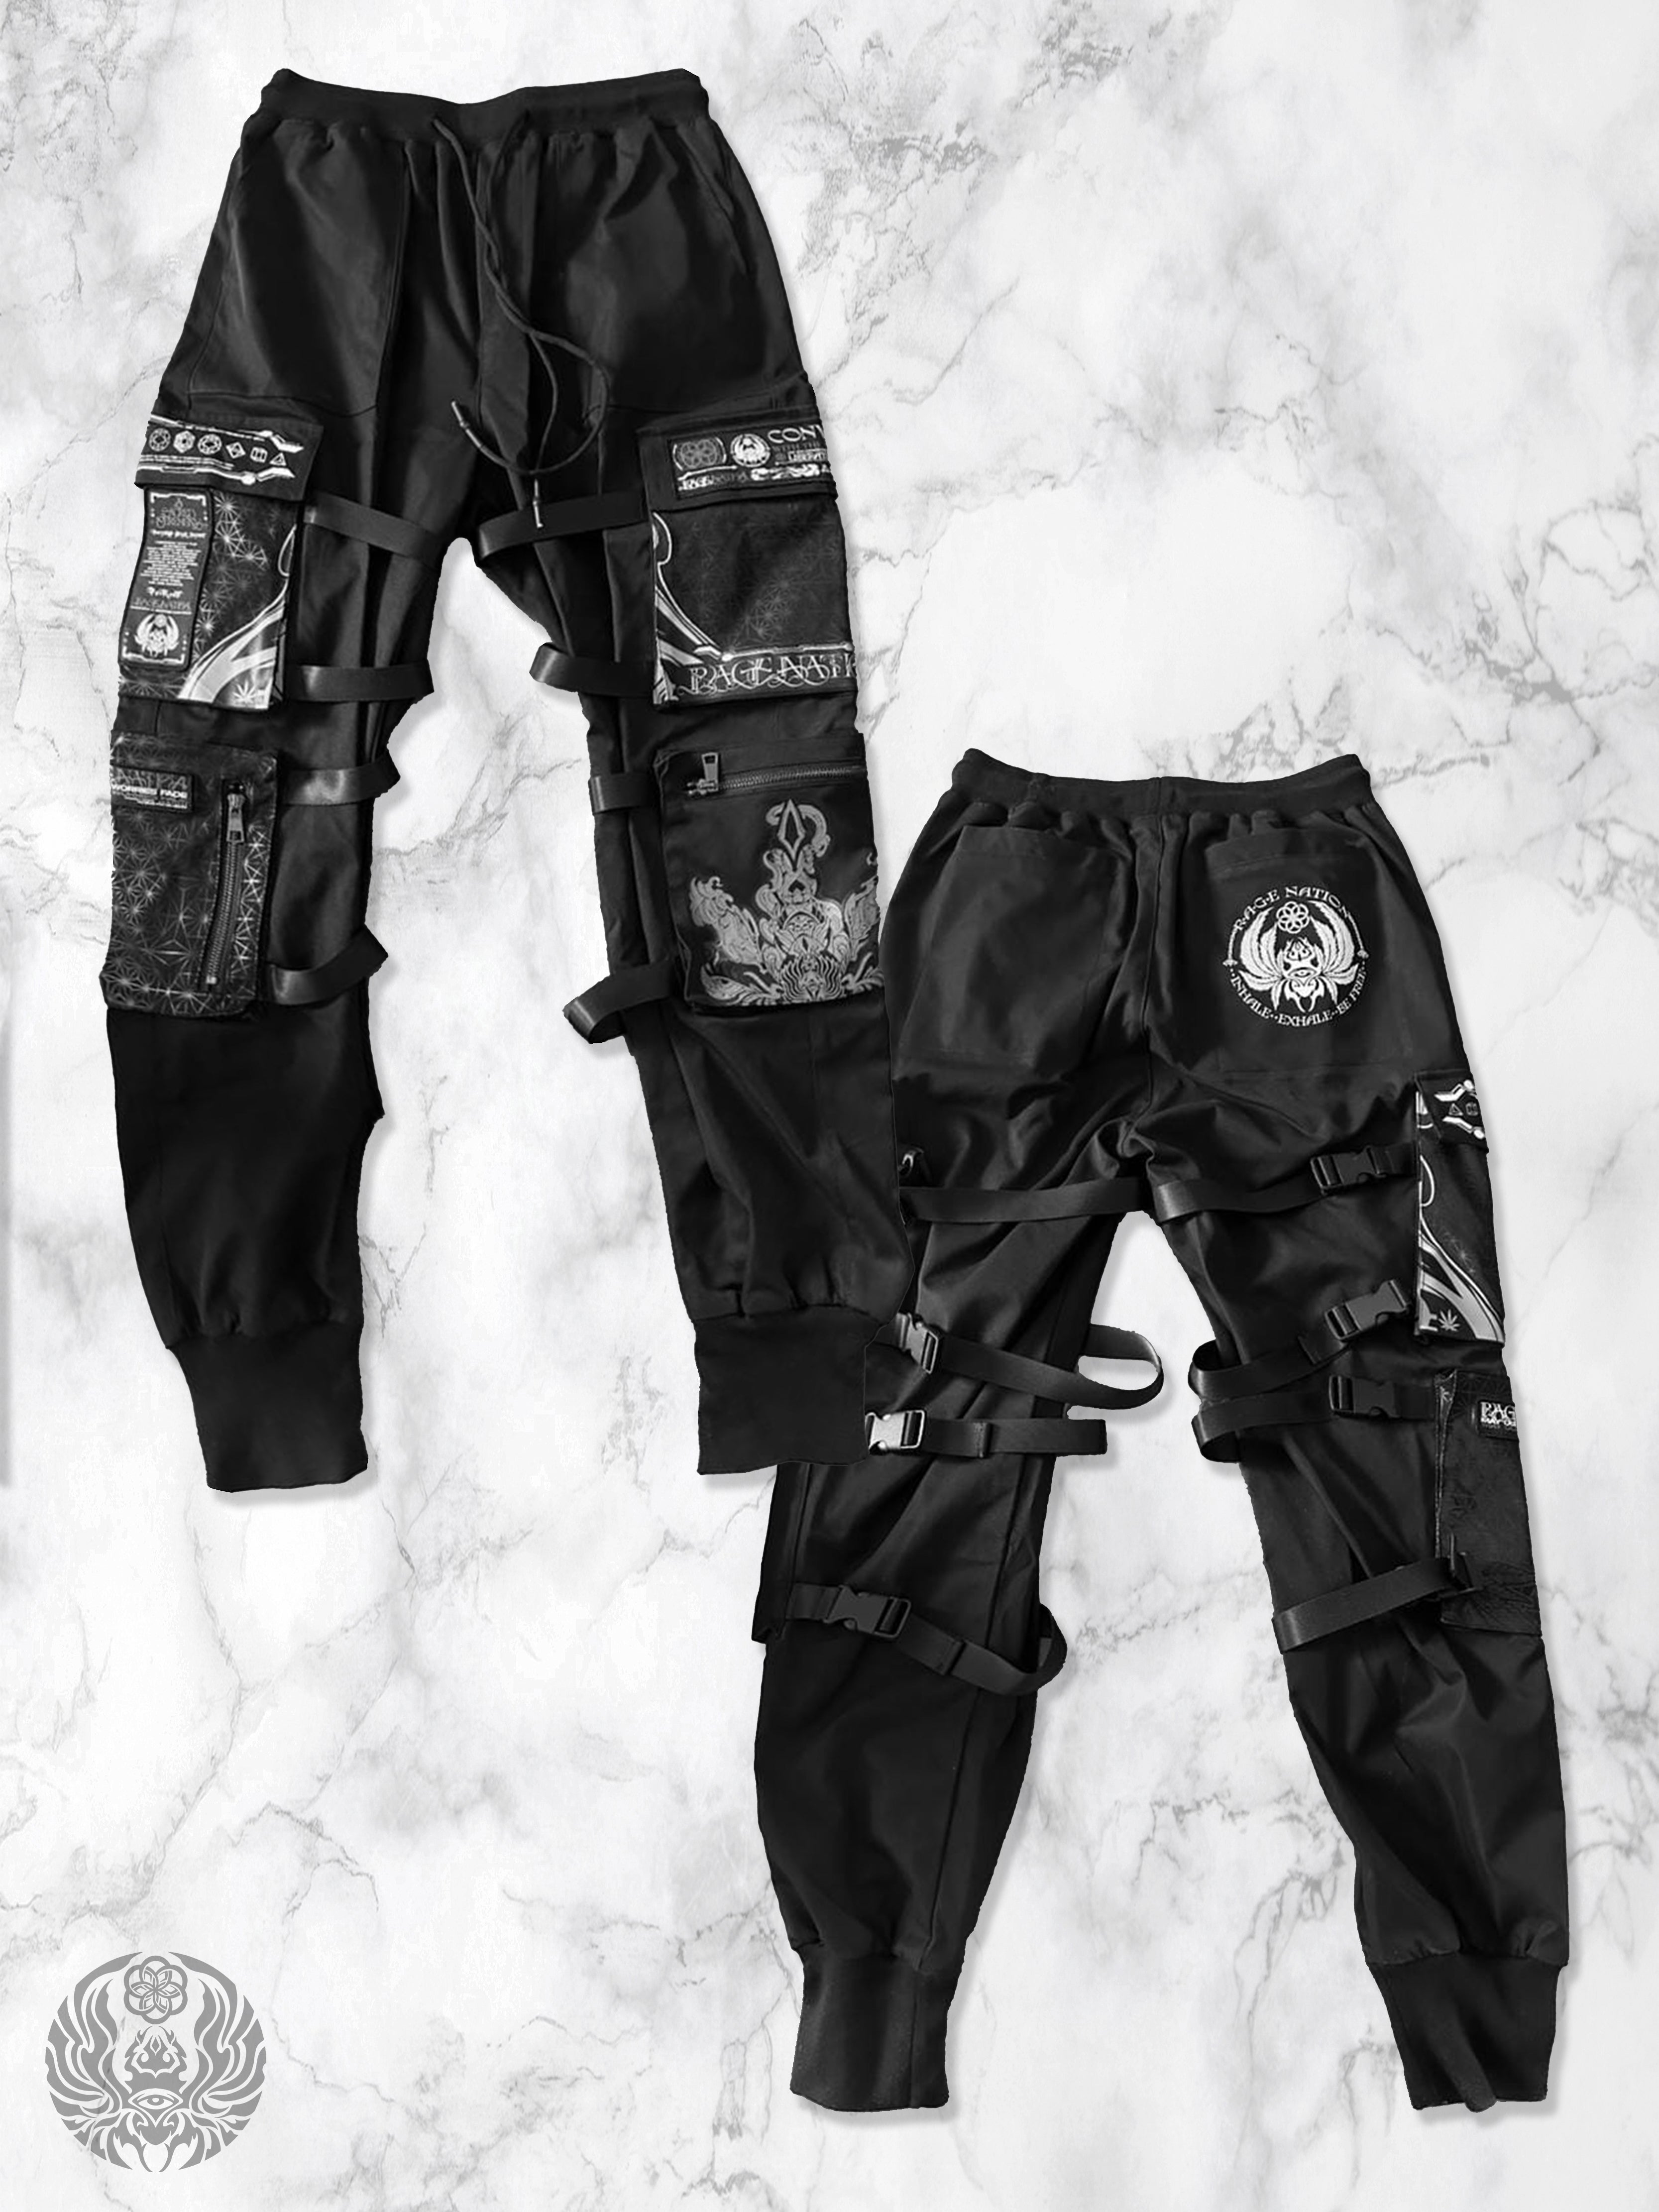 COMING SOON ✦ CONVENE WITH THE ELEMENTS ✦ Tactical Pants Coming Soon 